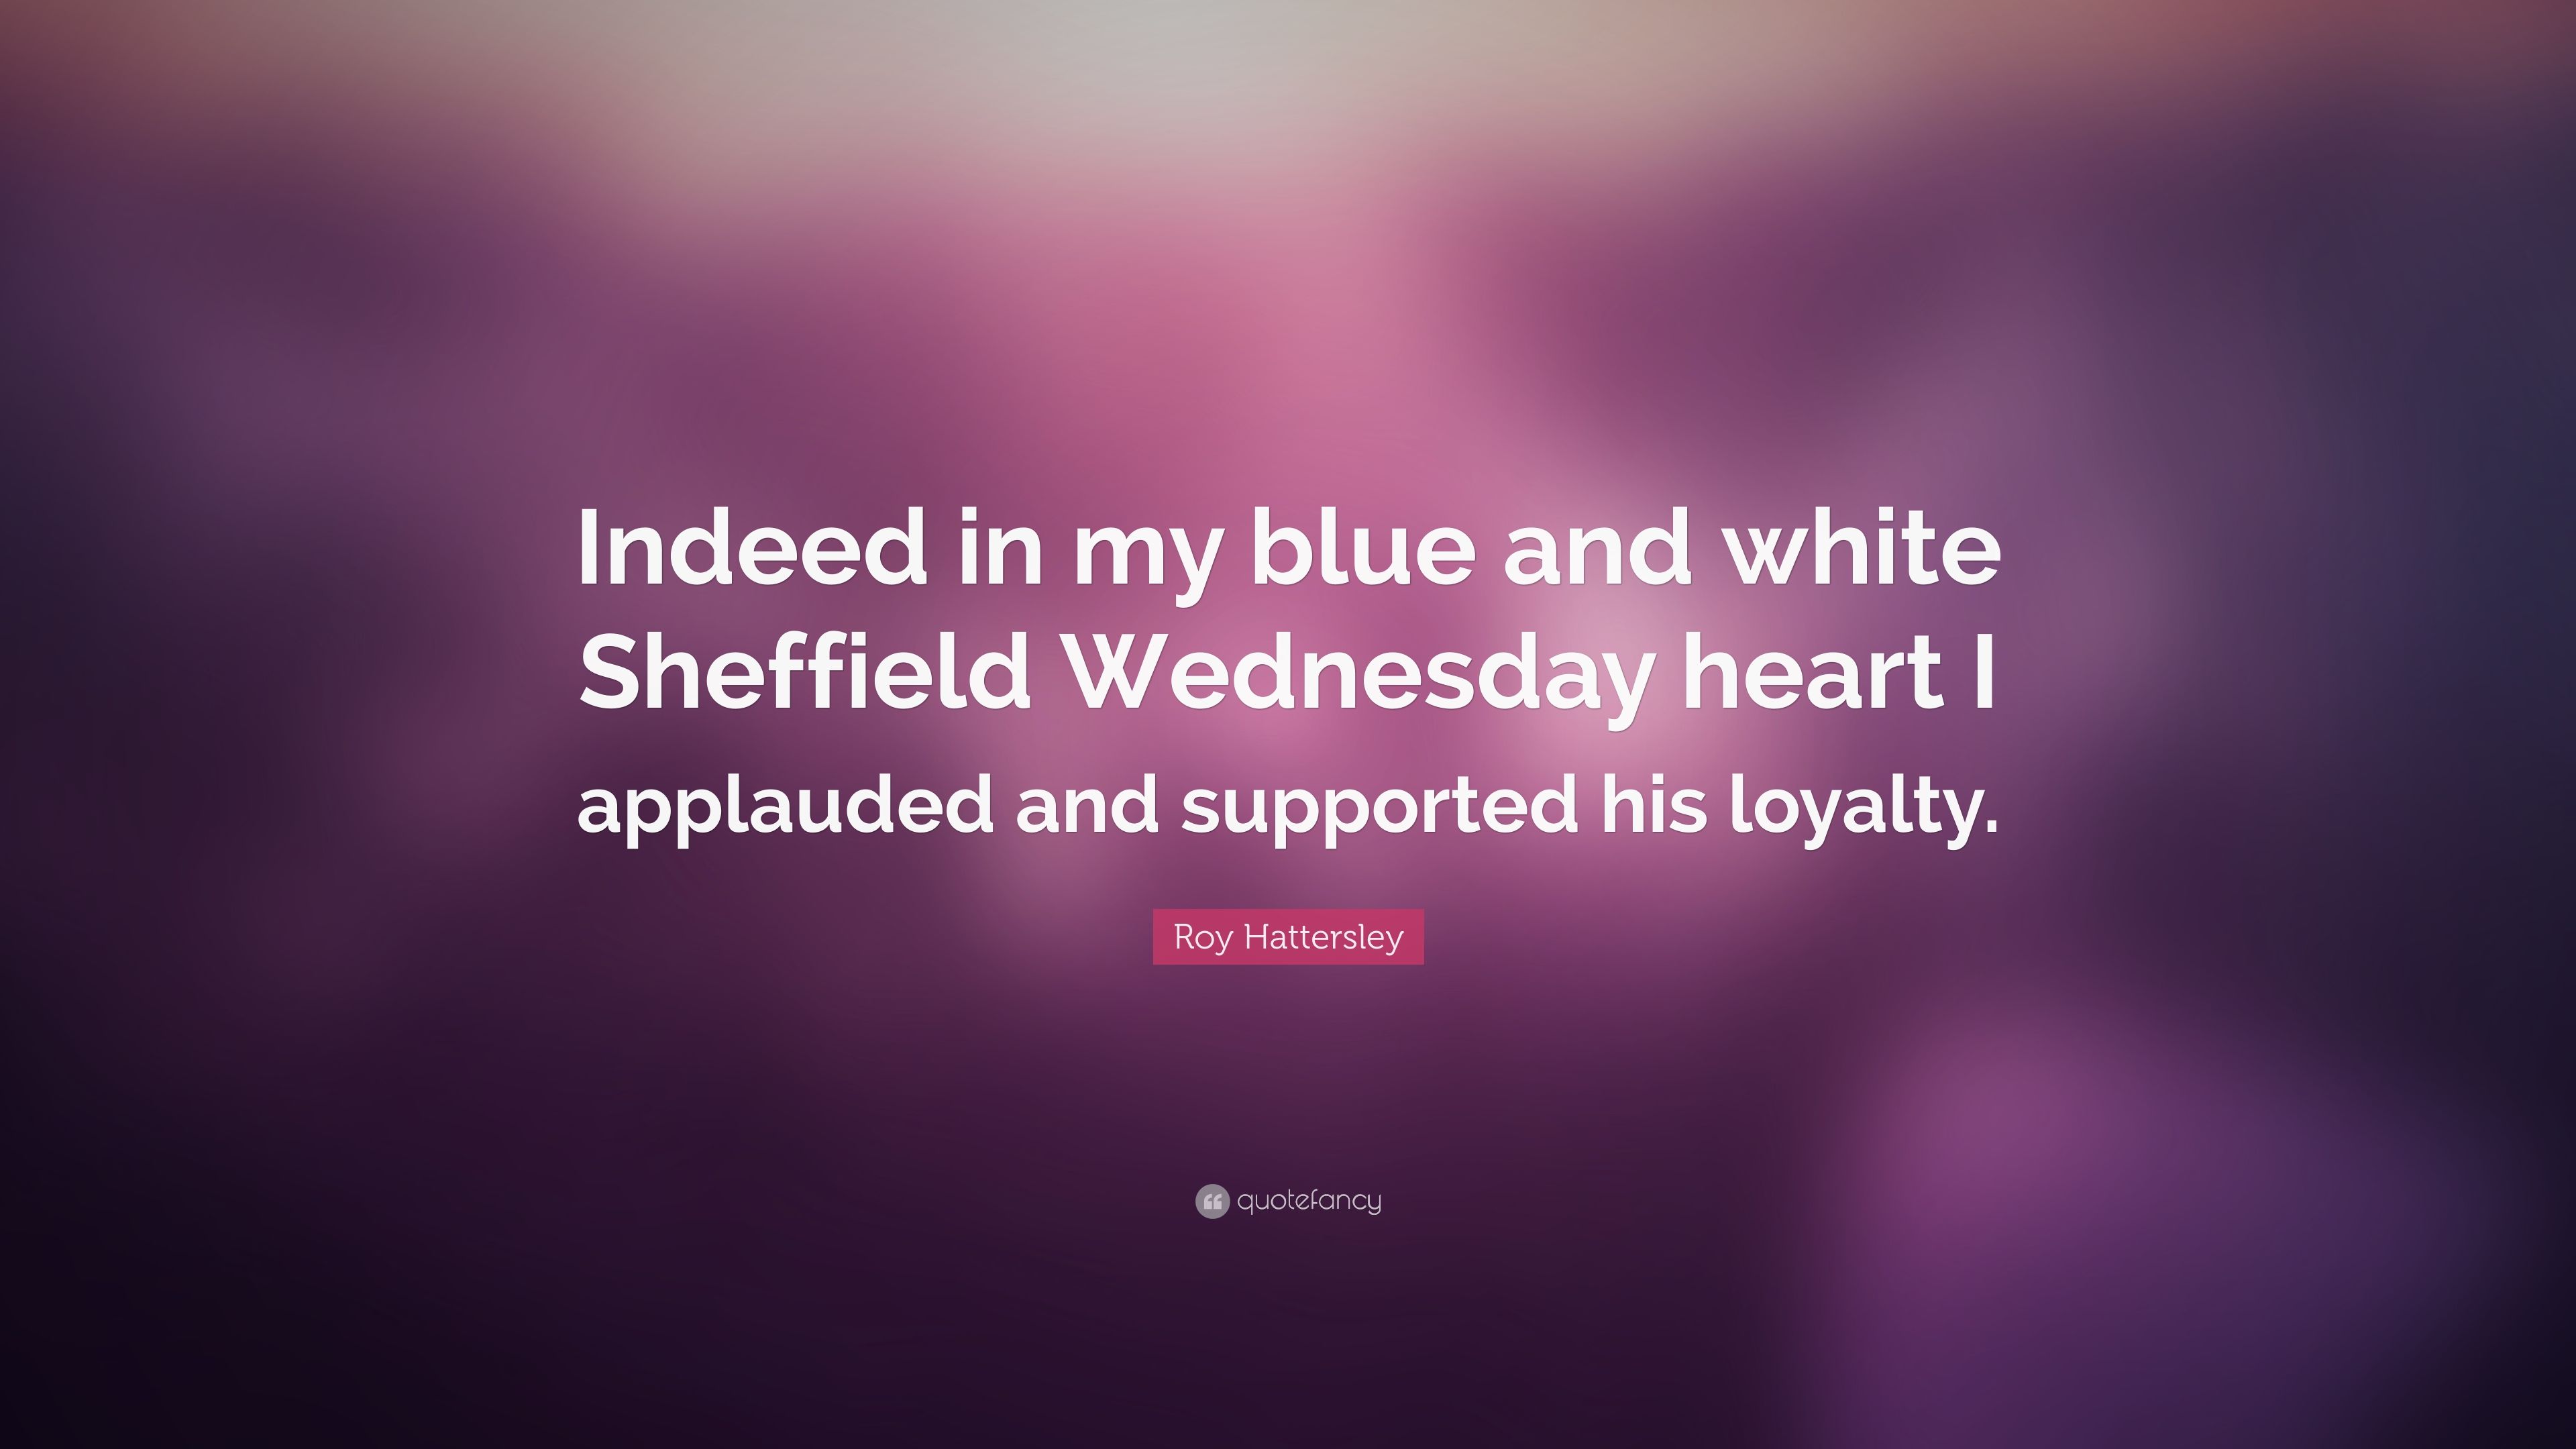 Roy Hattersley Quote: “Indeed in my blue and white Sheffield